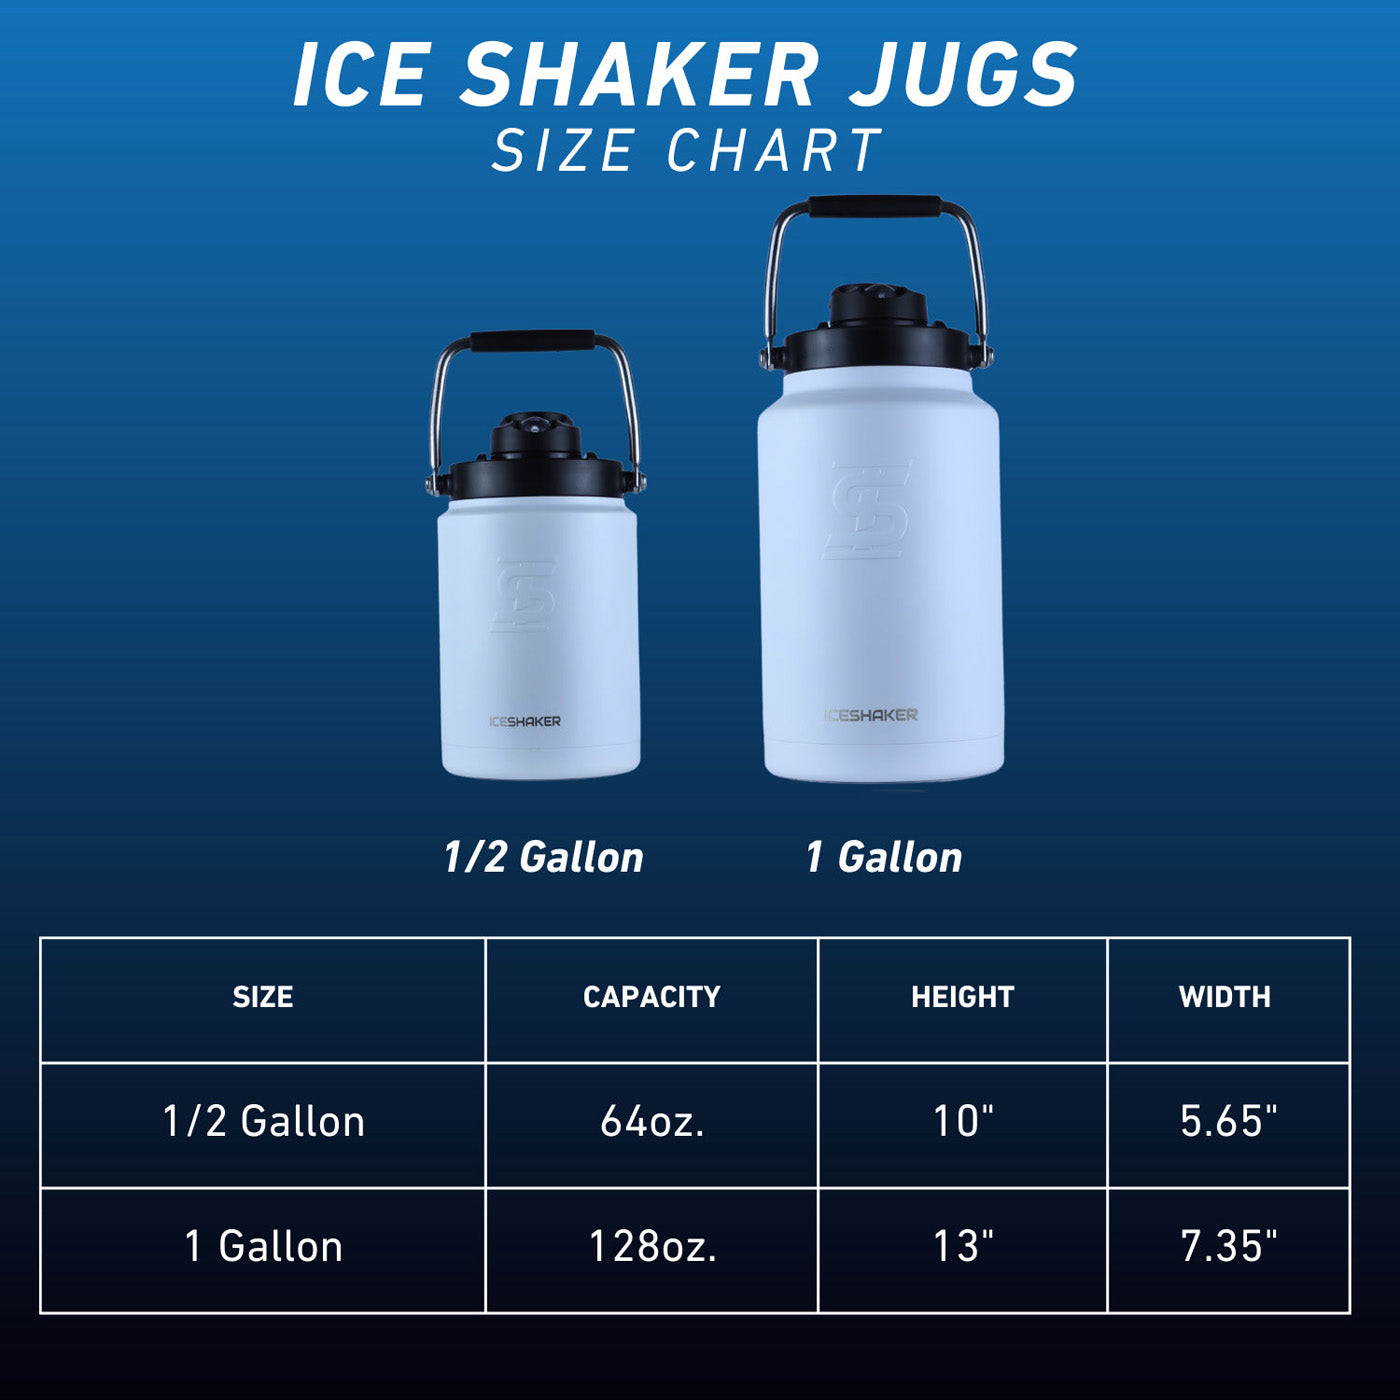 This Ice Shaker Jug Size Chart gives the dimensions of the half Gallon Jug and the One Gallon Jug. Half-Gallon Jug Dimensions: Capacity = 64oz. Height = 10 inches Diameter of Jug = 5.65 inches. One Gallon Jug Dimensions: Capacity = 128oz. Height = 13 inches Diameter of Jug = 7.35 inches.